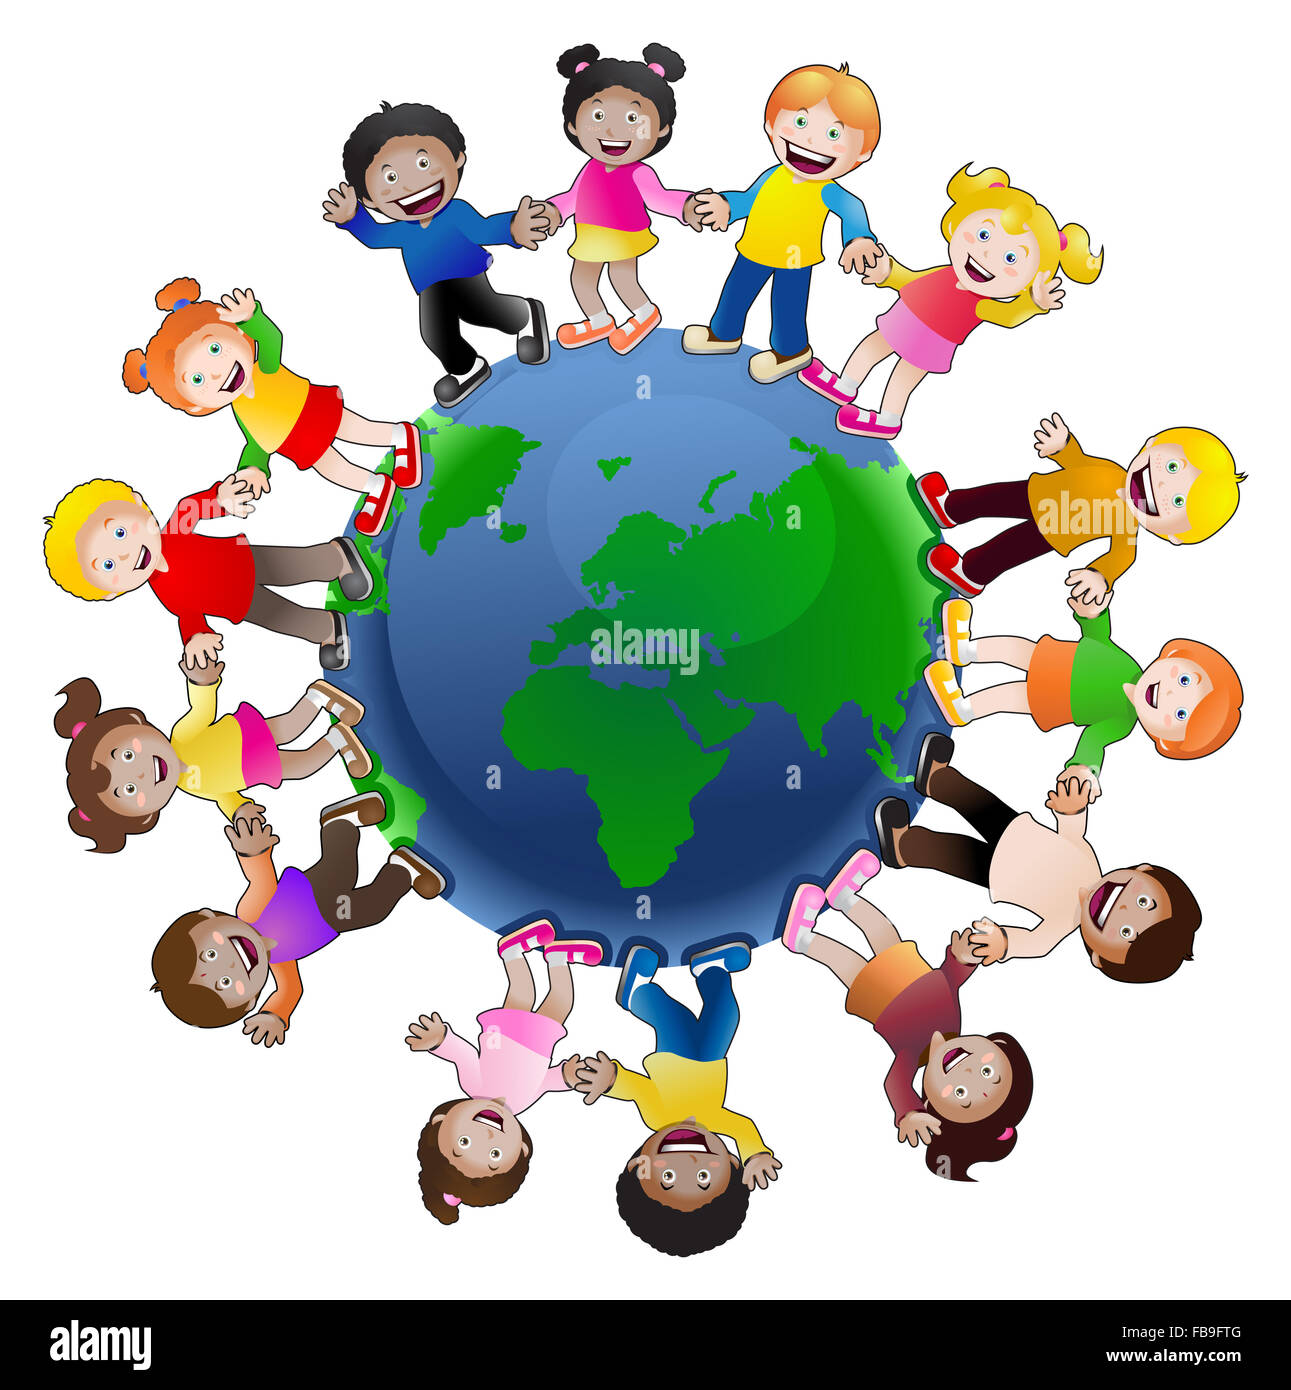 illustration of multi-cultural children holding hands surrounding the globe, symbolizing world unity and peace isolated on white Stock Photo